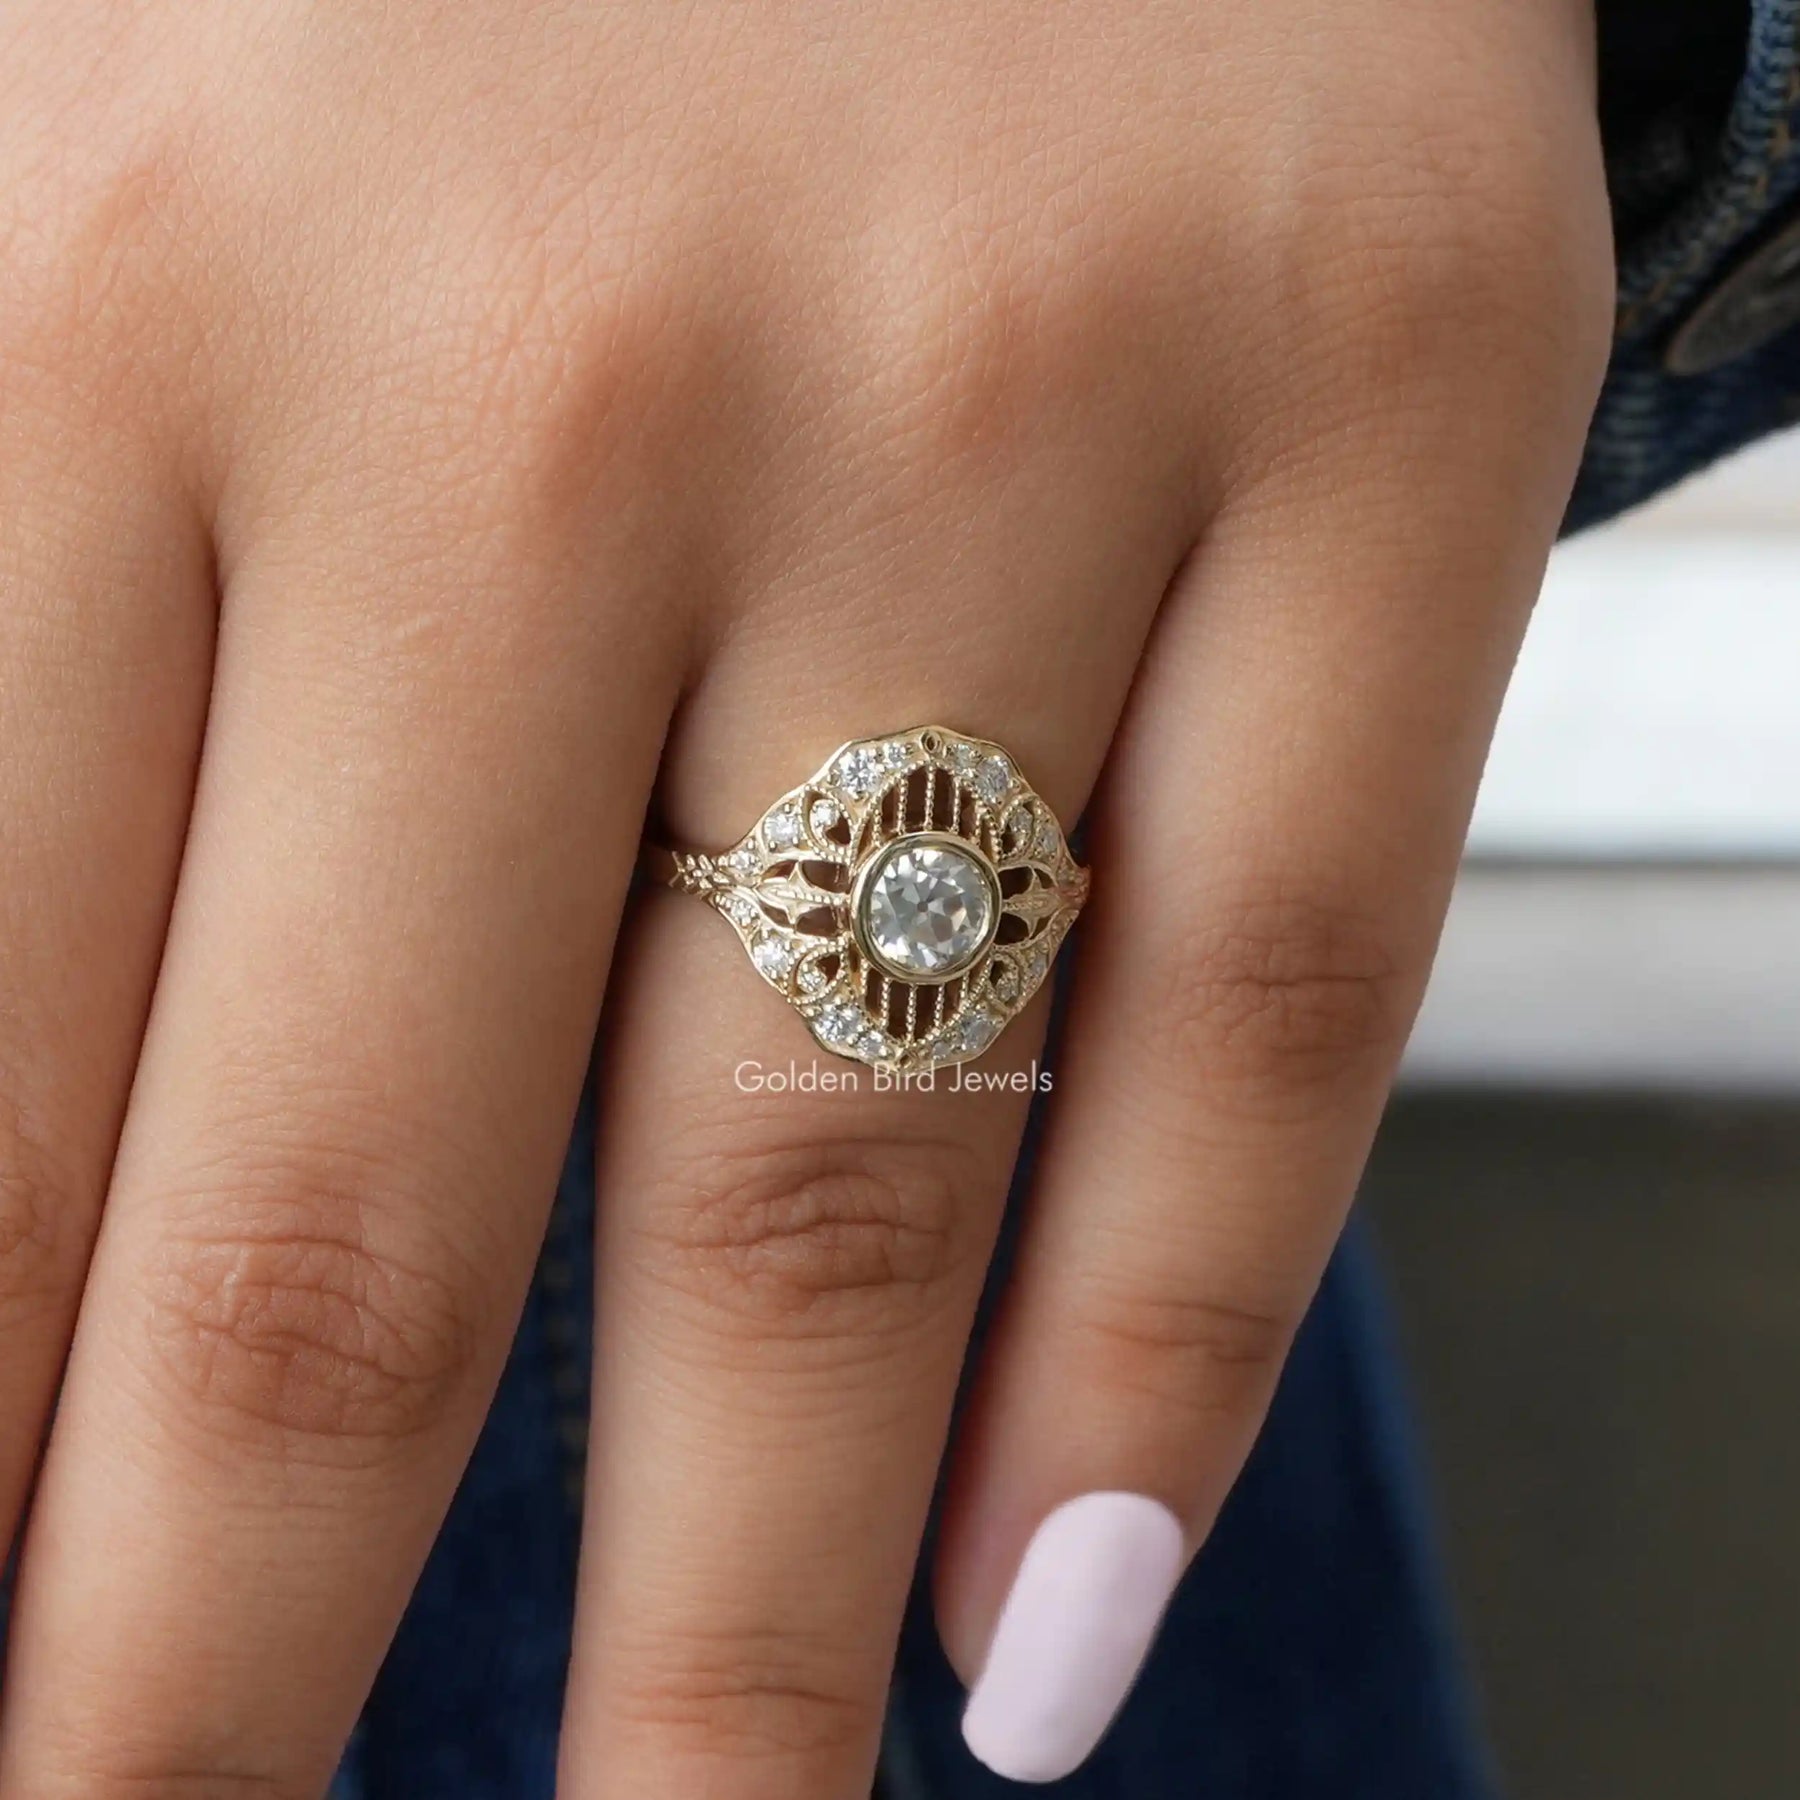 [In finger front view of round cut vintage style ring made of 14k yellow gold]-[Golden Bird Jewels]